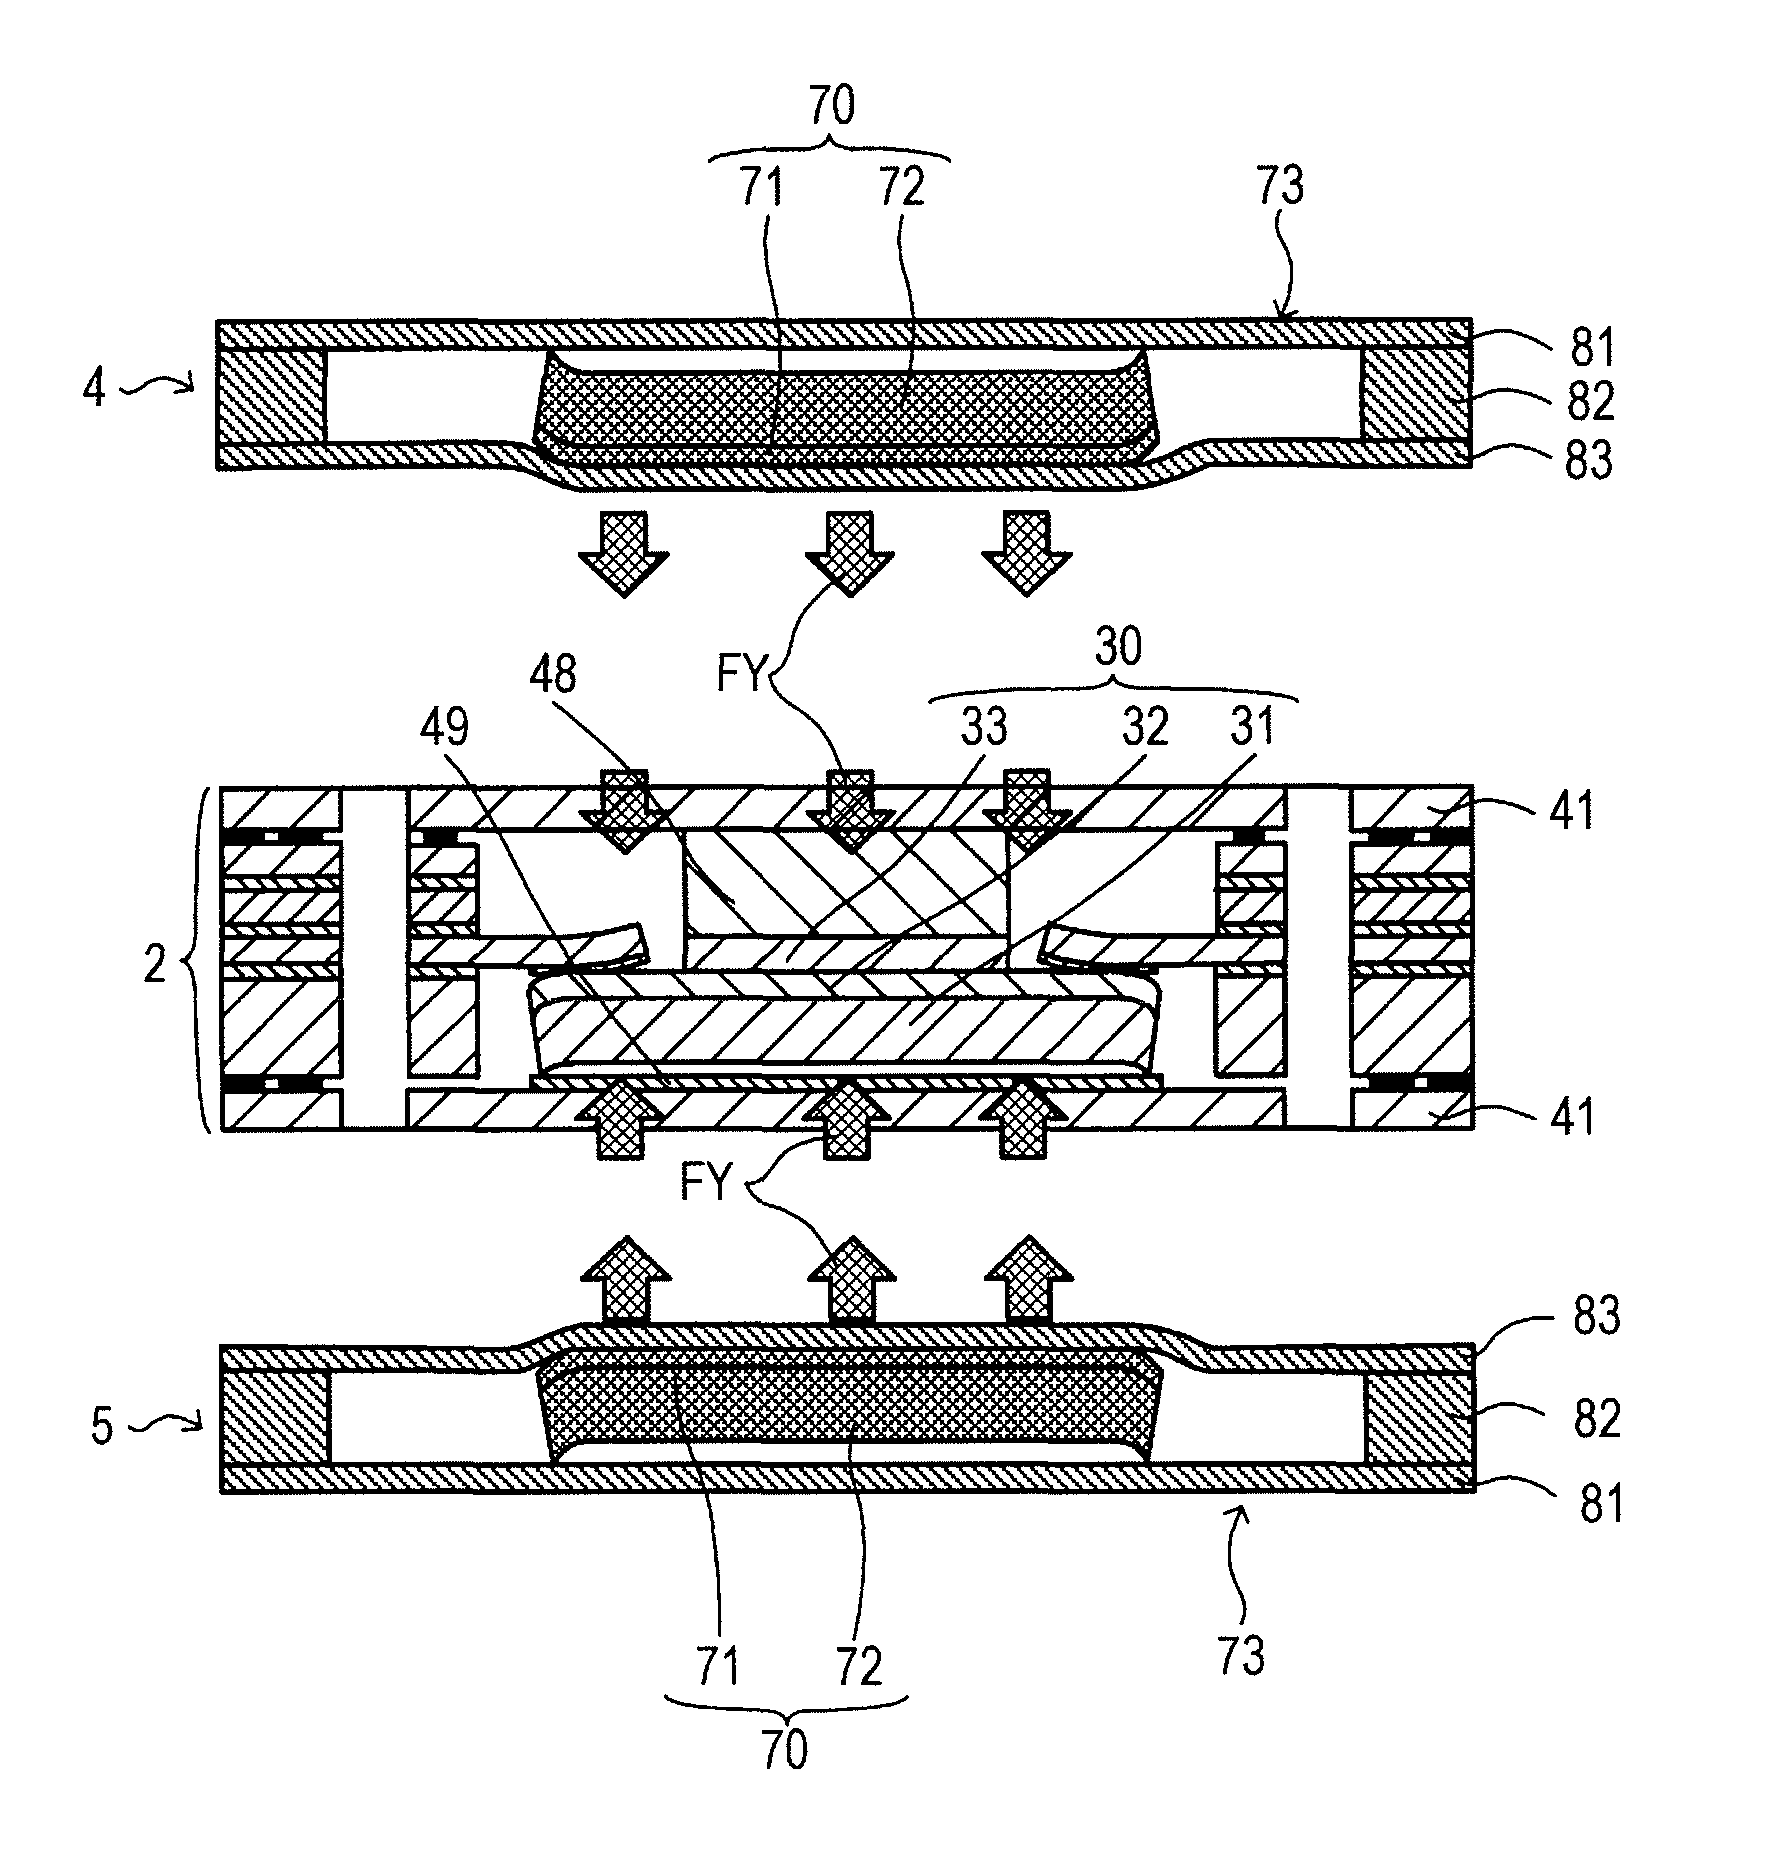 Solid oxide fuel cell apparatus